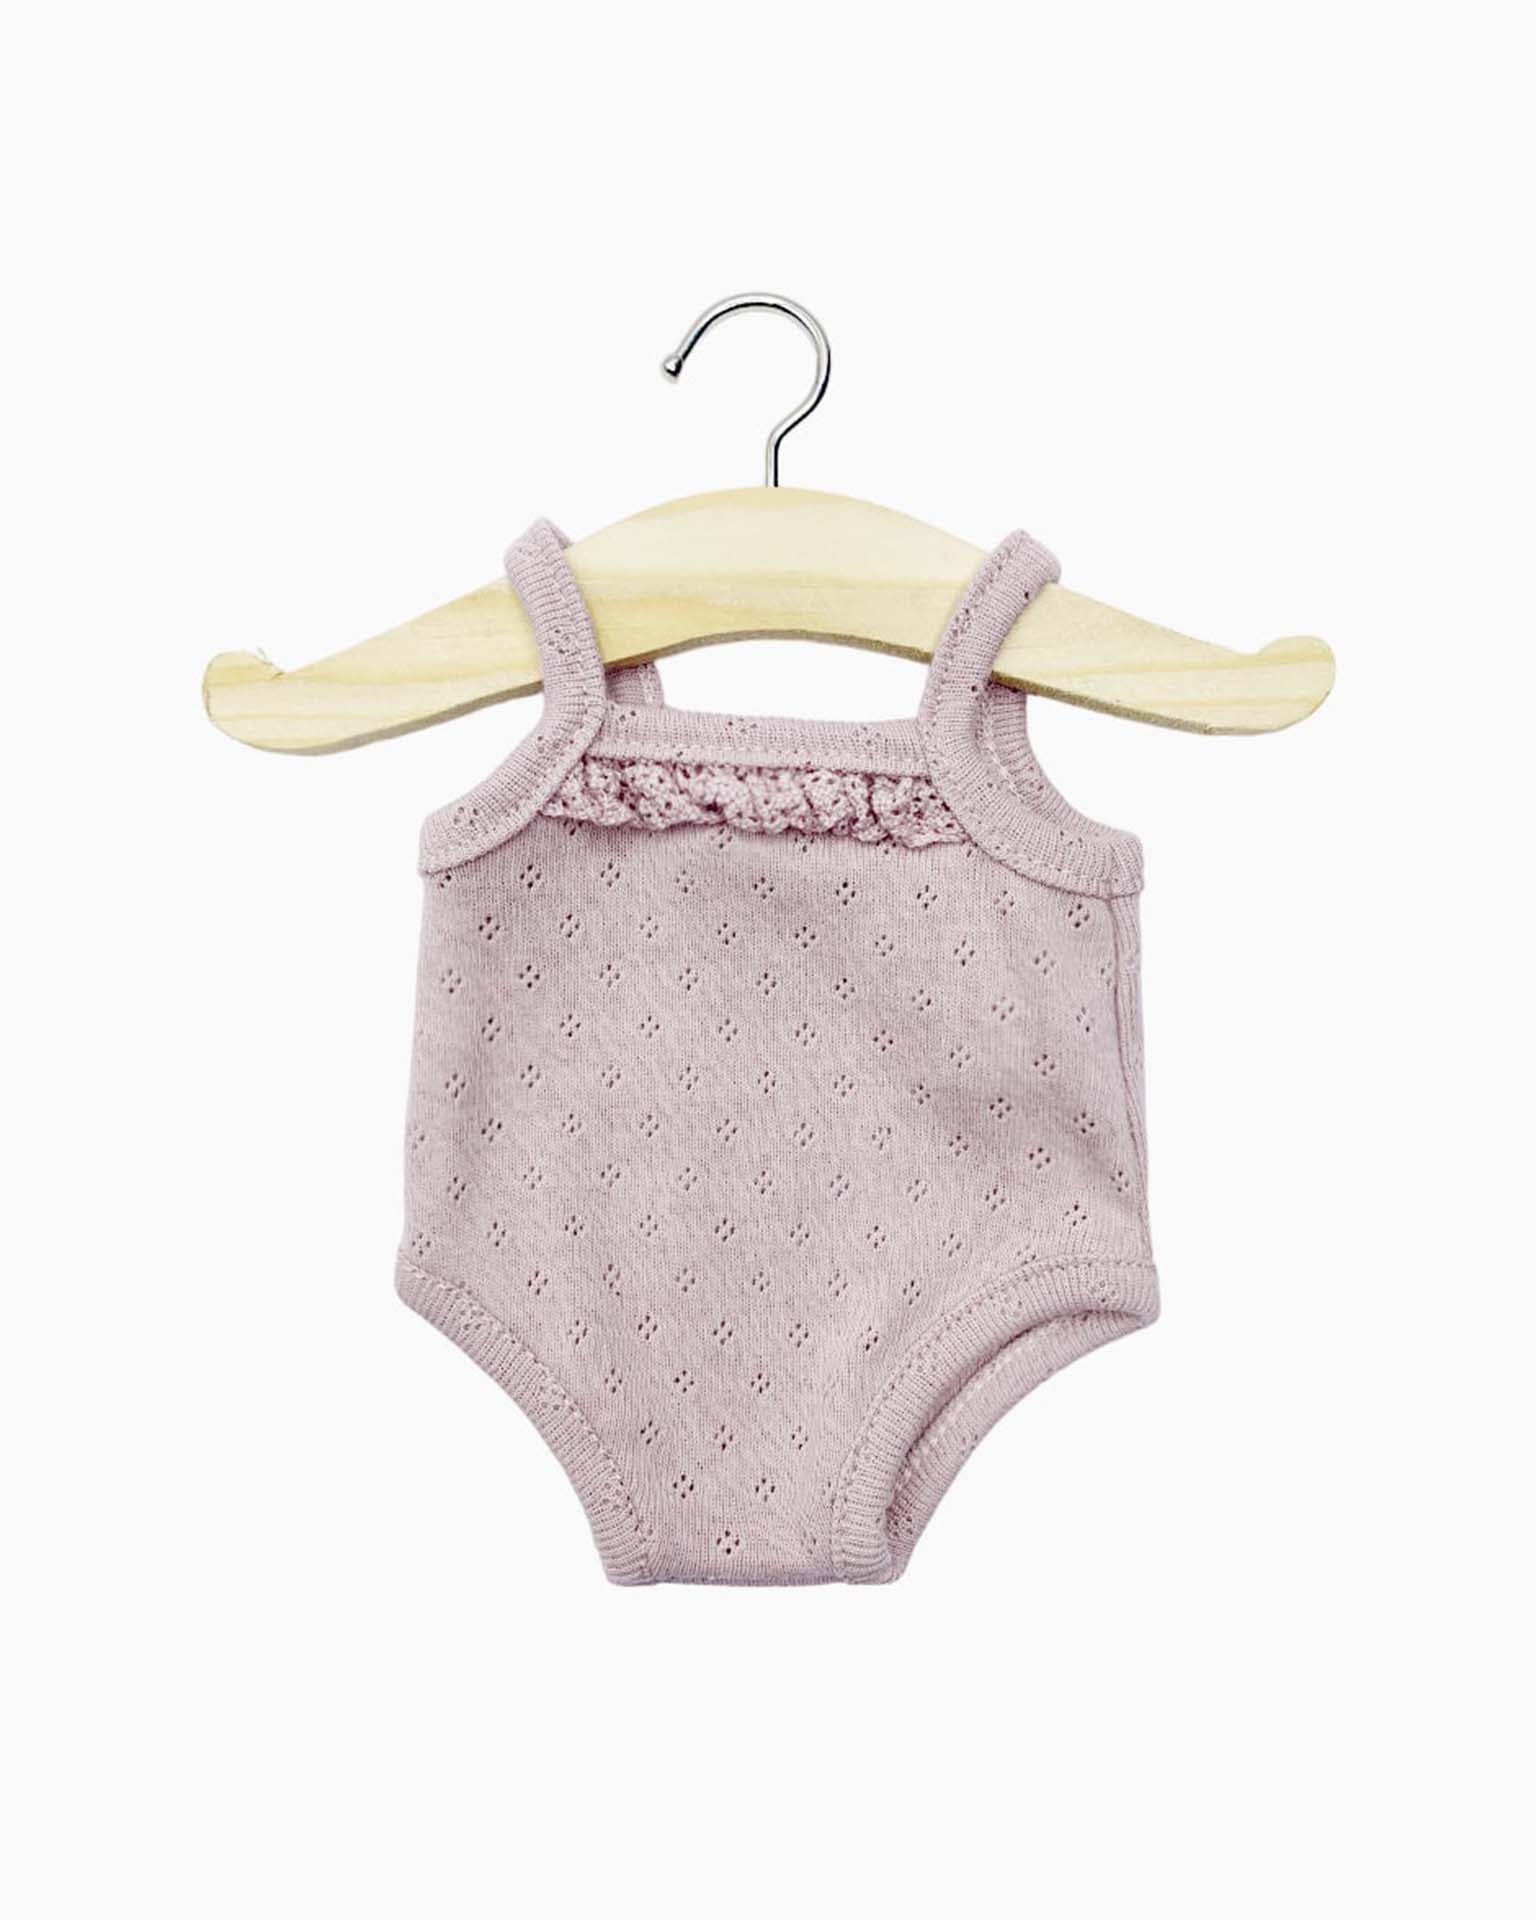 Little Minikane play Les P’tits Basiques pointelle bodysuit in old pink